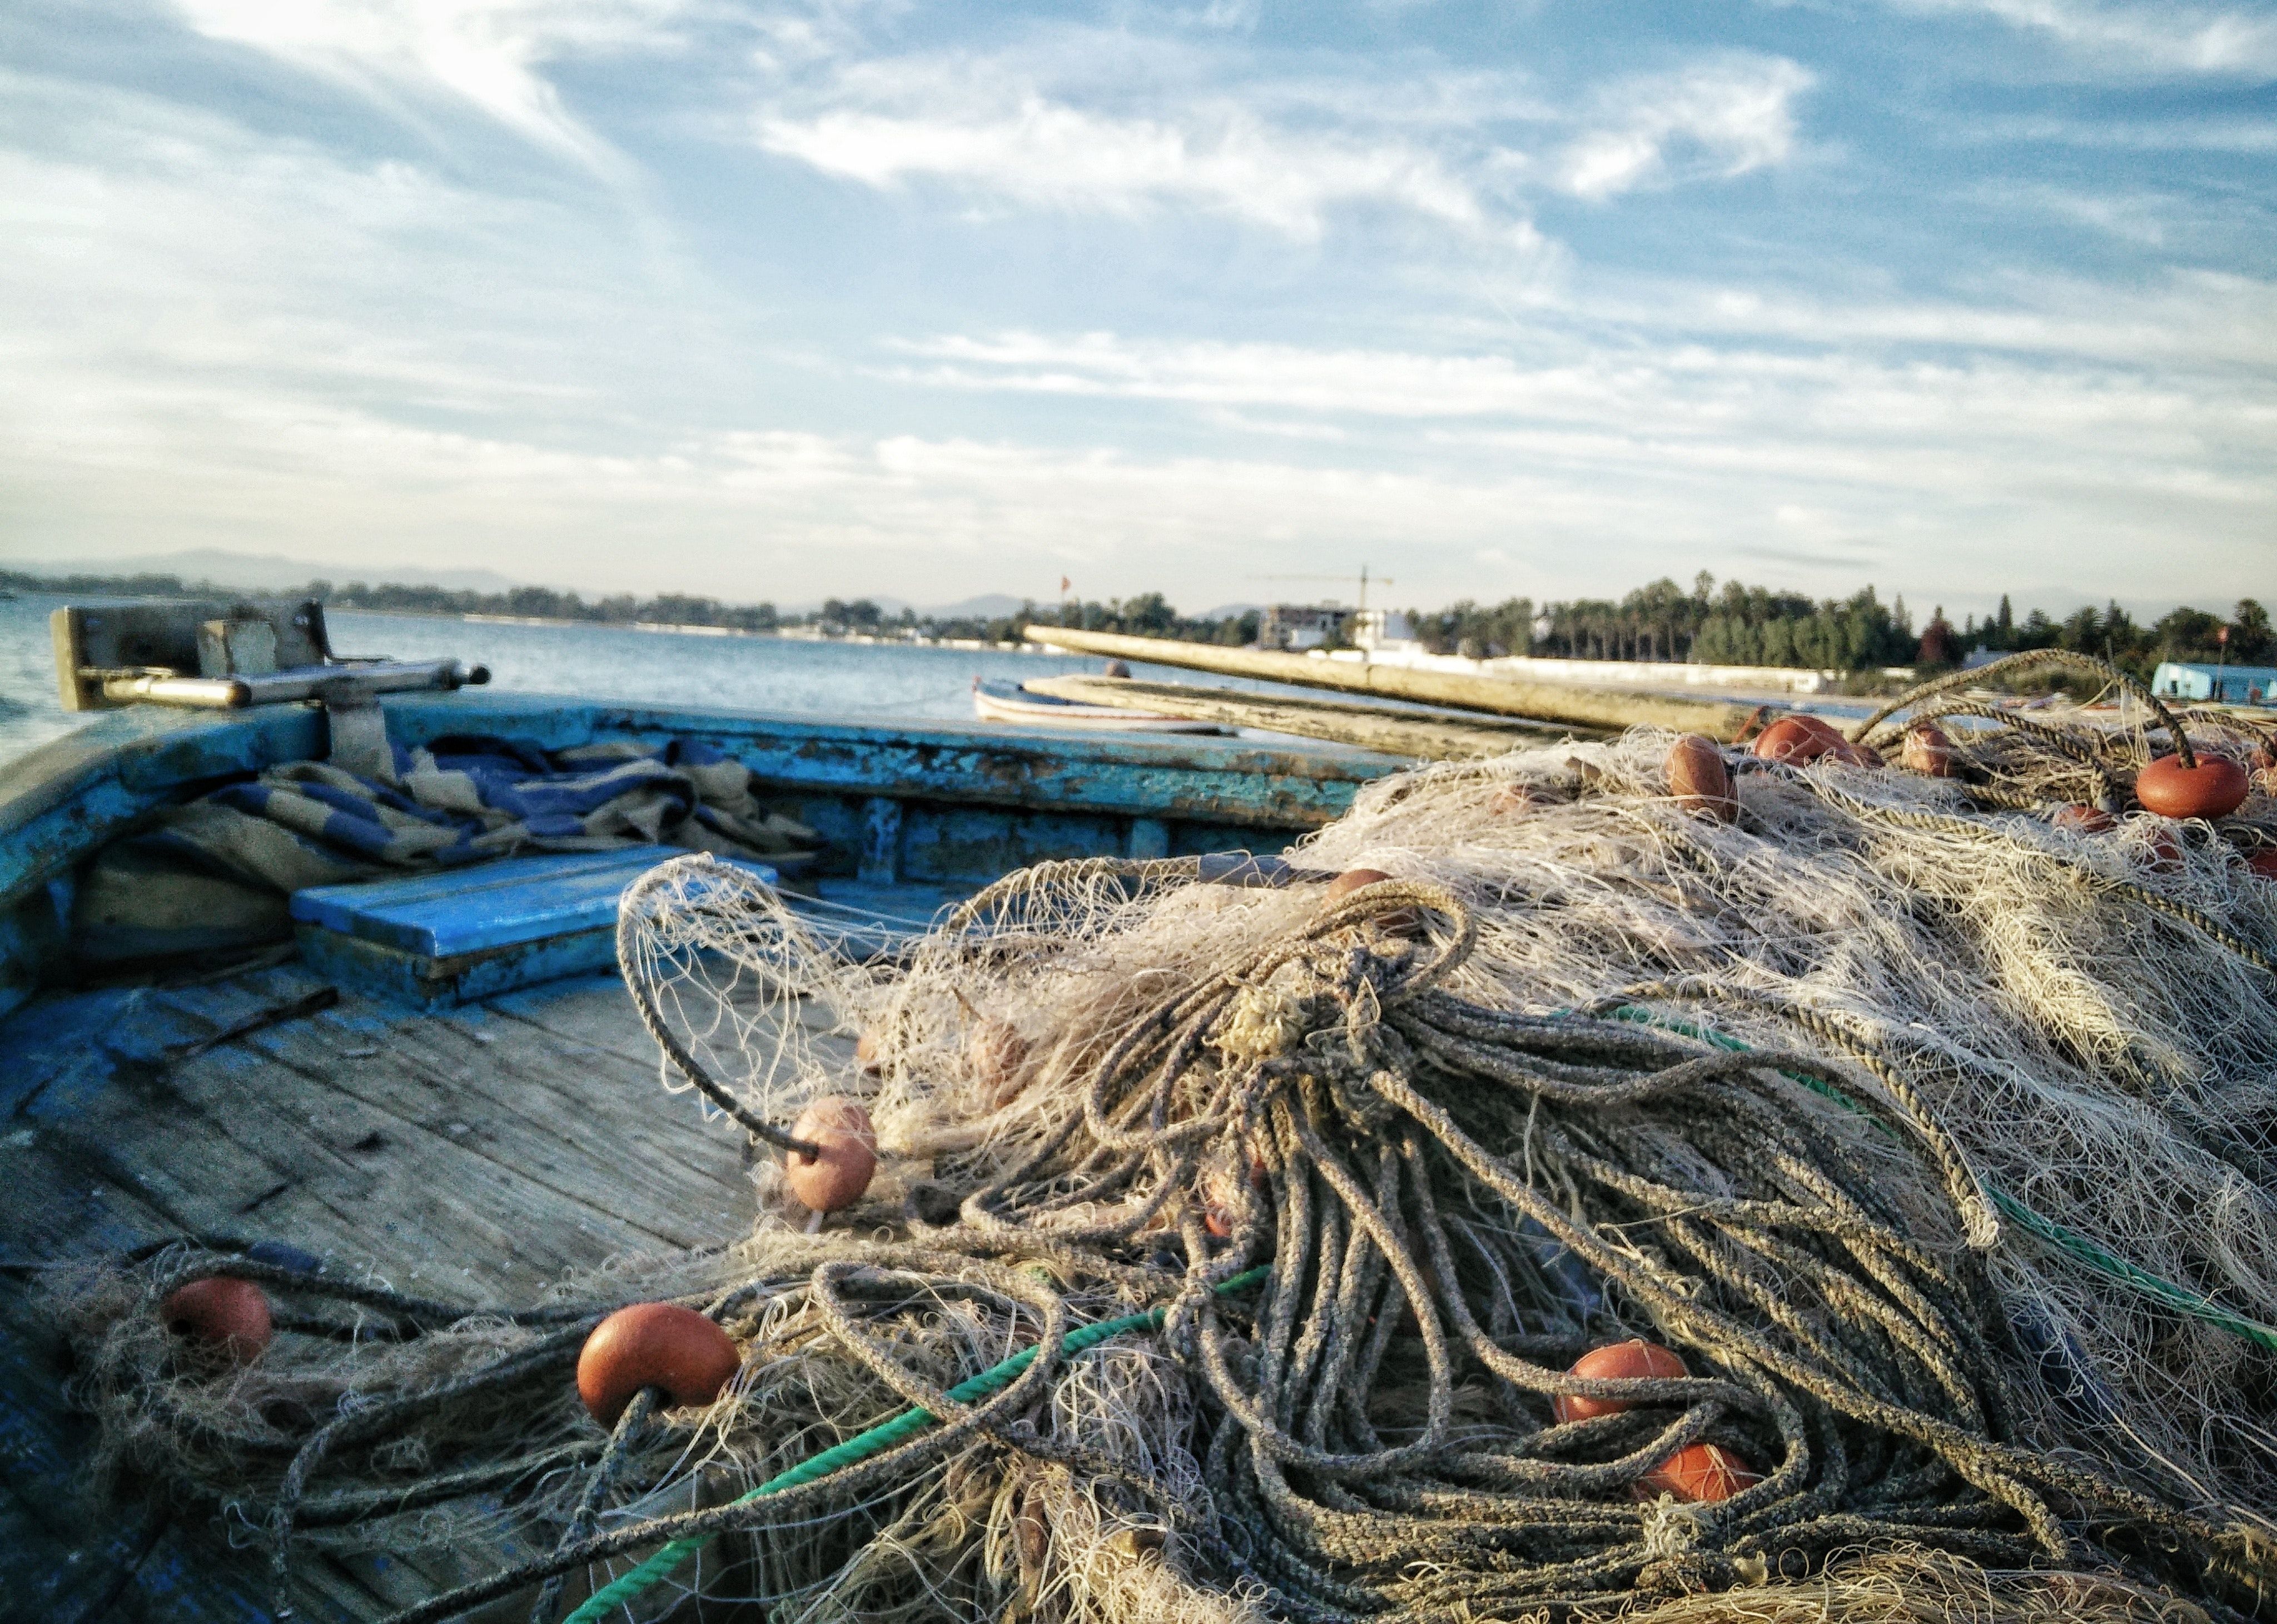 Good news from Italy! Fishermen will be allowed to collect plastic at sea